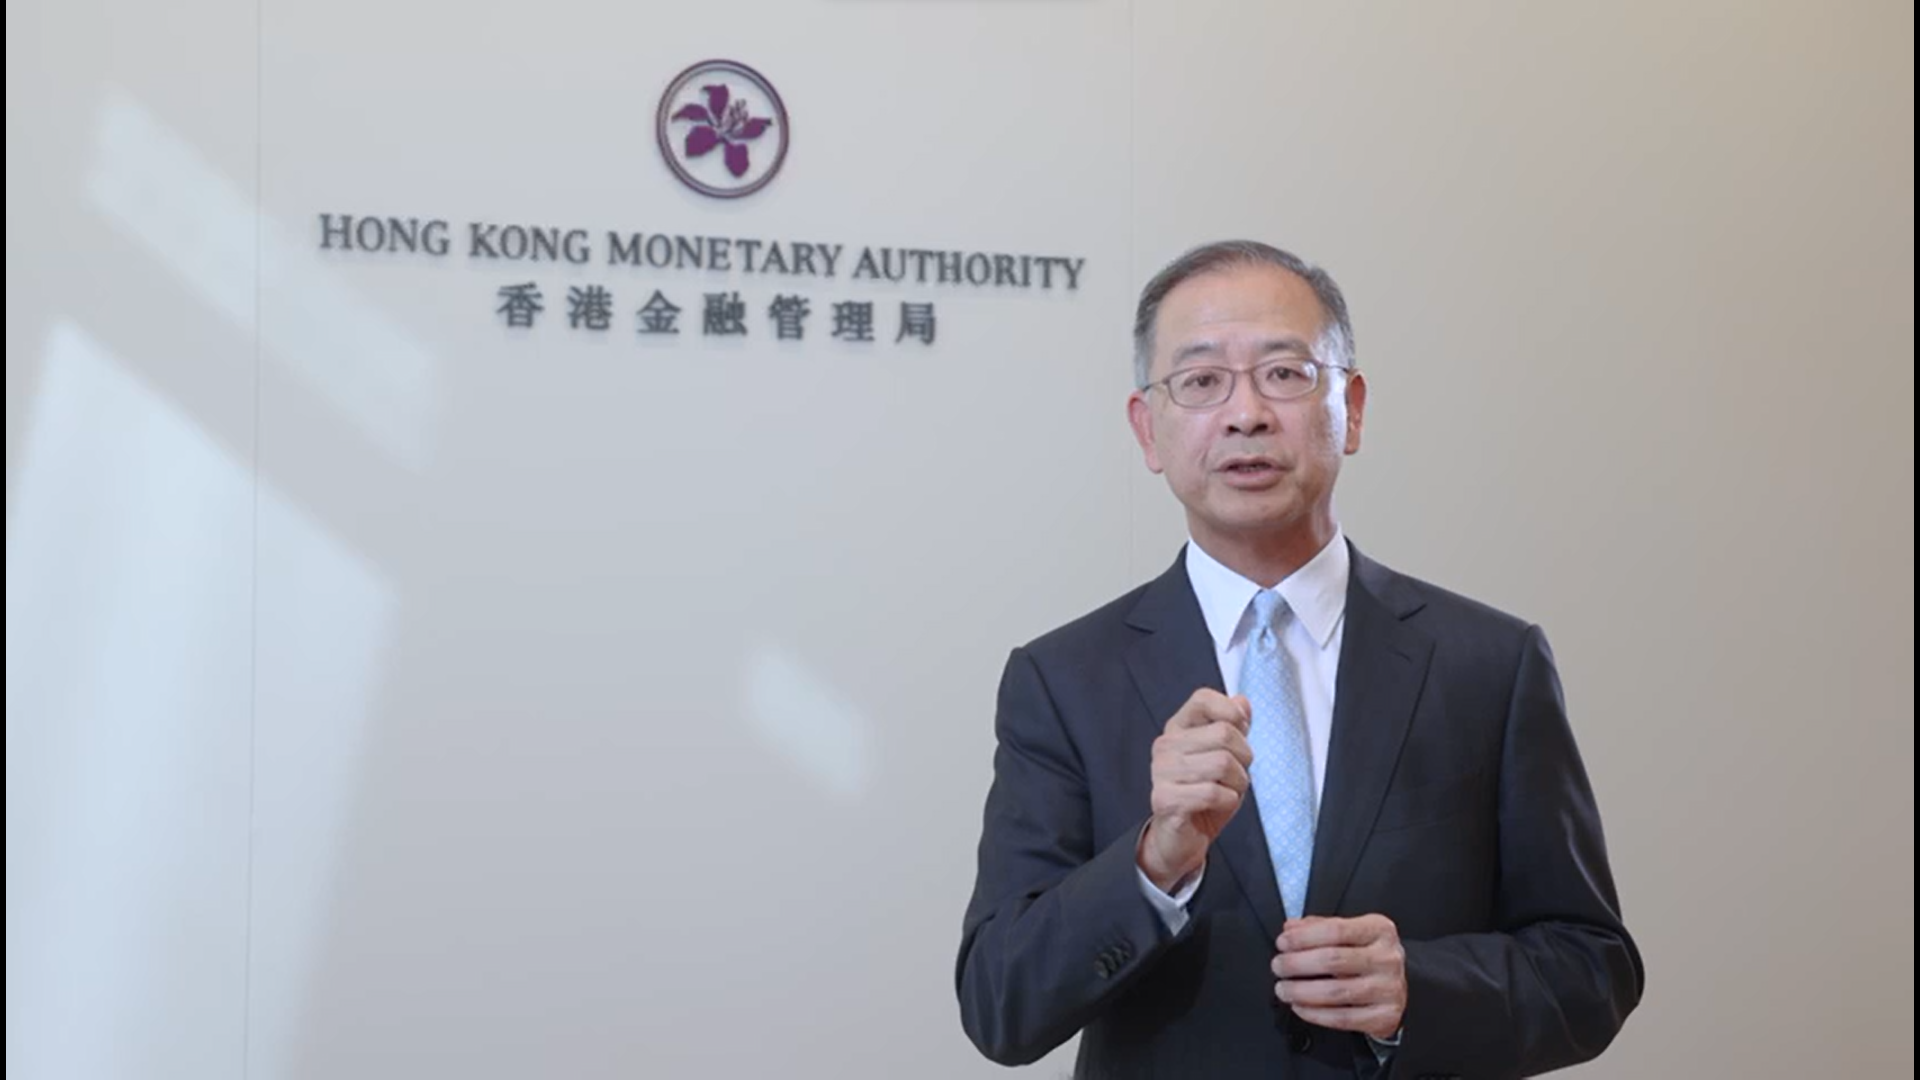 Mr Eddie Yue, Chief Executive of the Hong Kong Monetary Authority welcomes the launch of Anti-Deception Alliance.